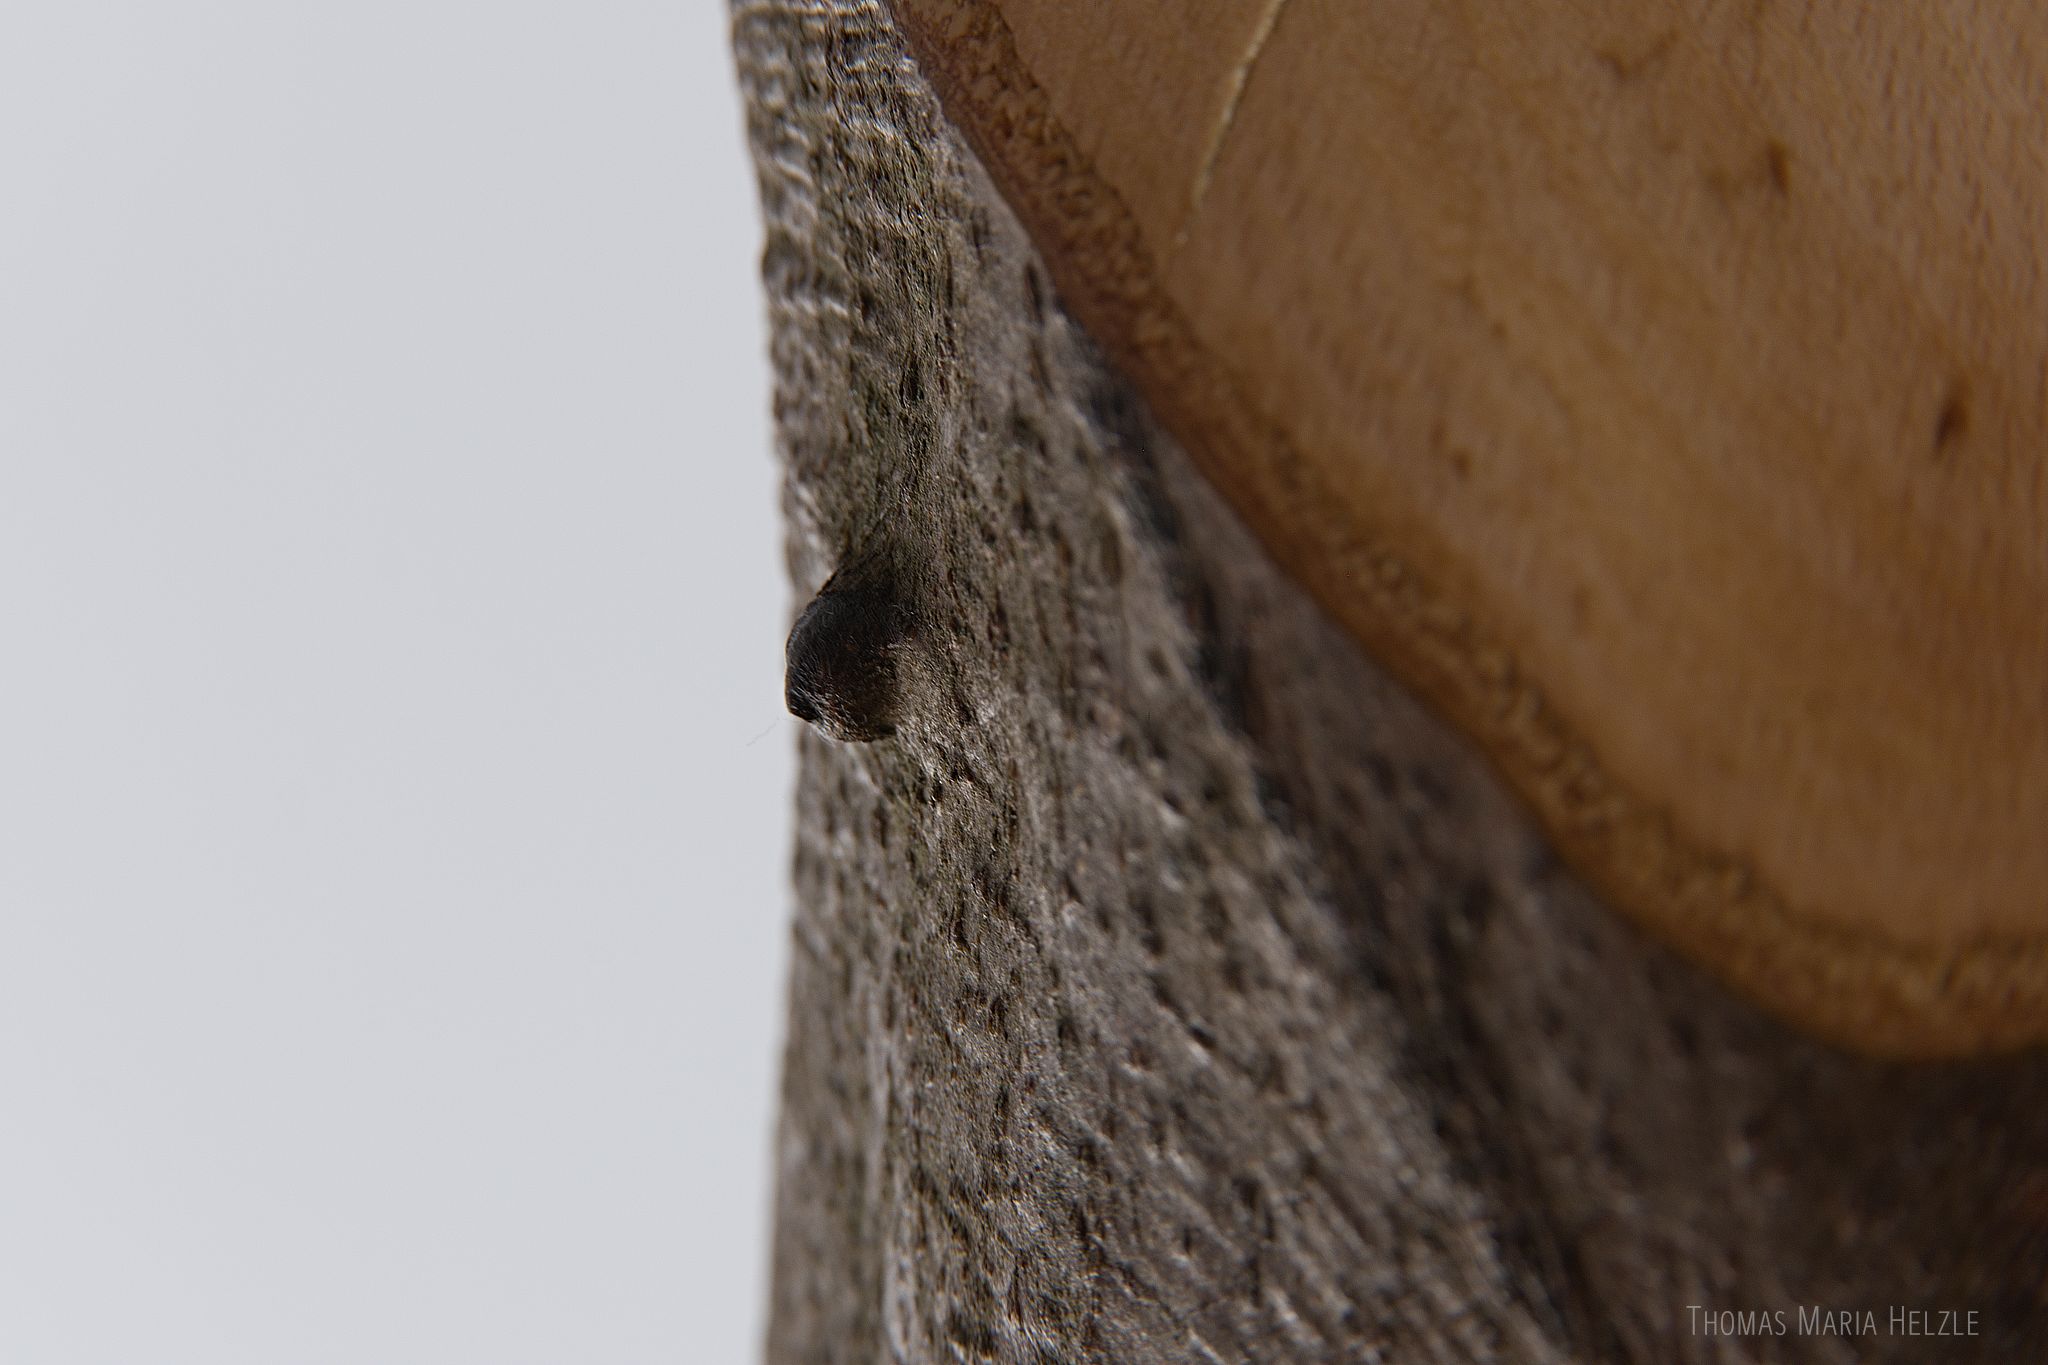 Close up of a little knob growing out of the bark part of the sculpture. A white wall behind reflects on the shiny surface. Strong depth of field makes foreground and background blurry.